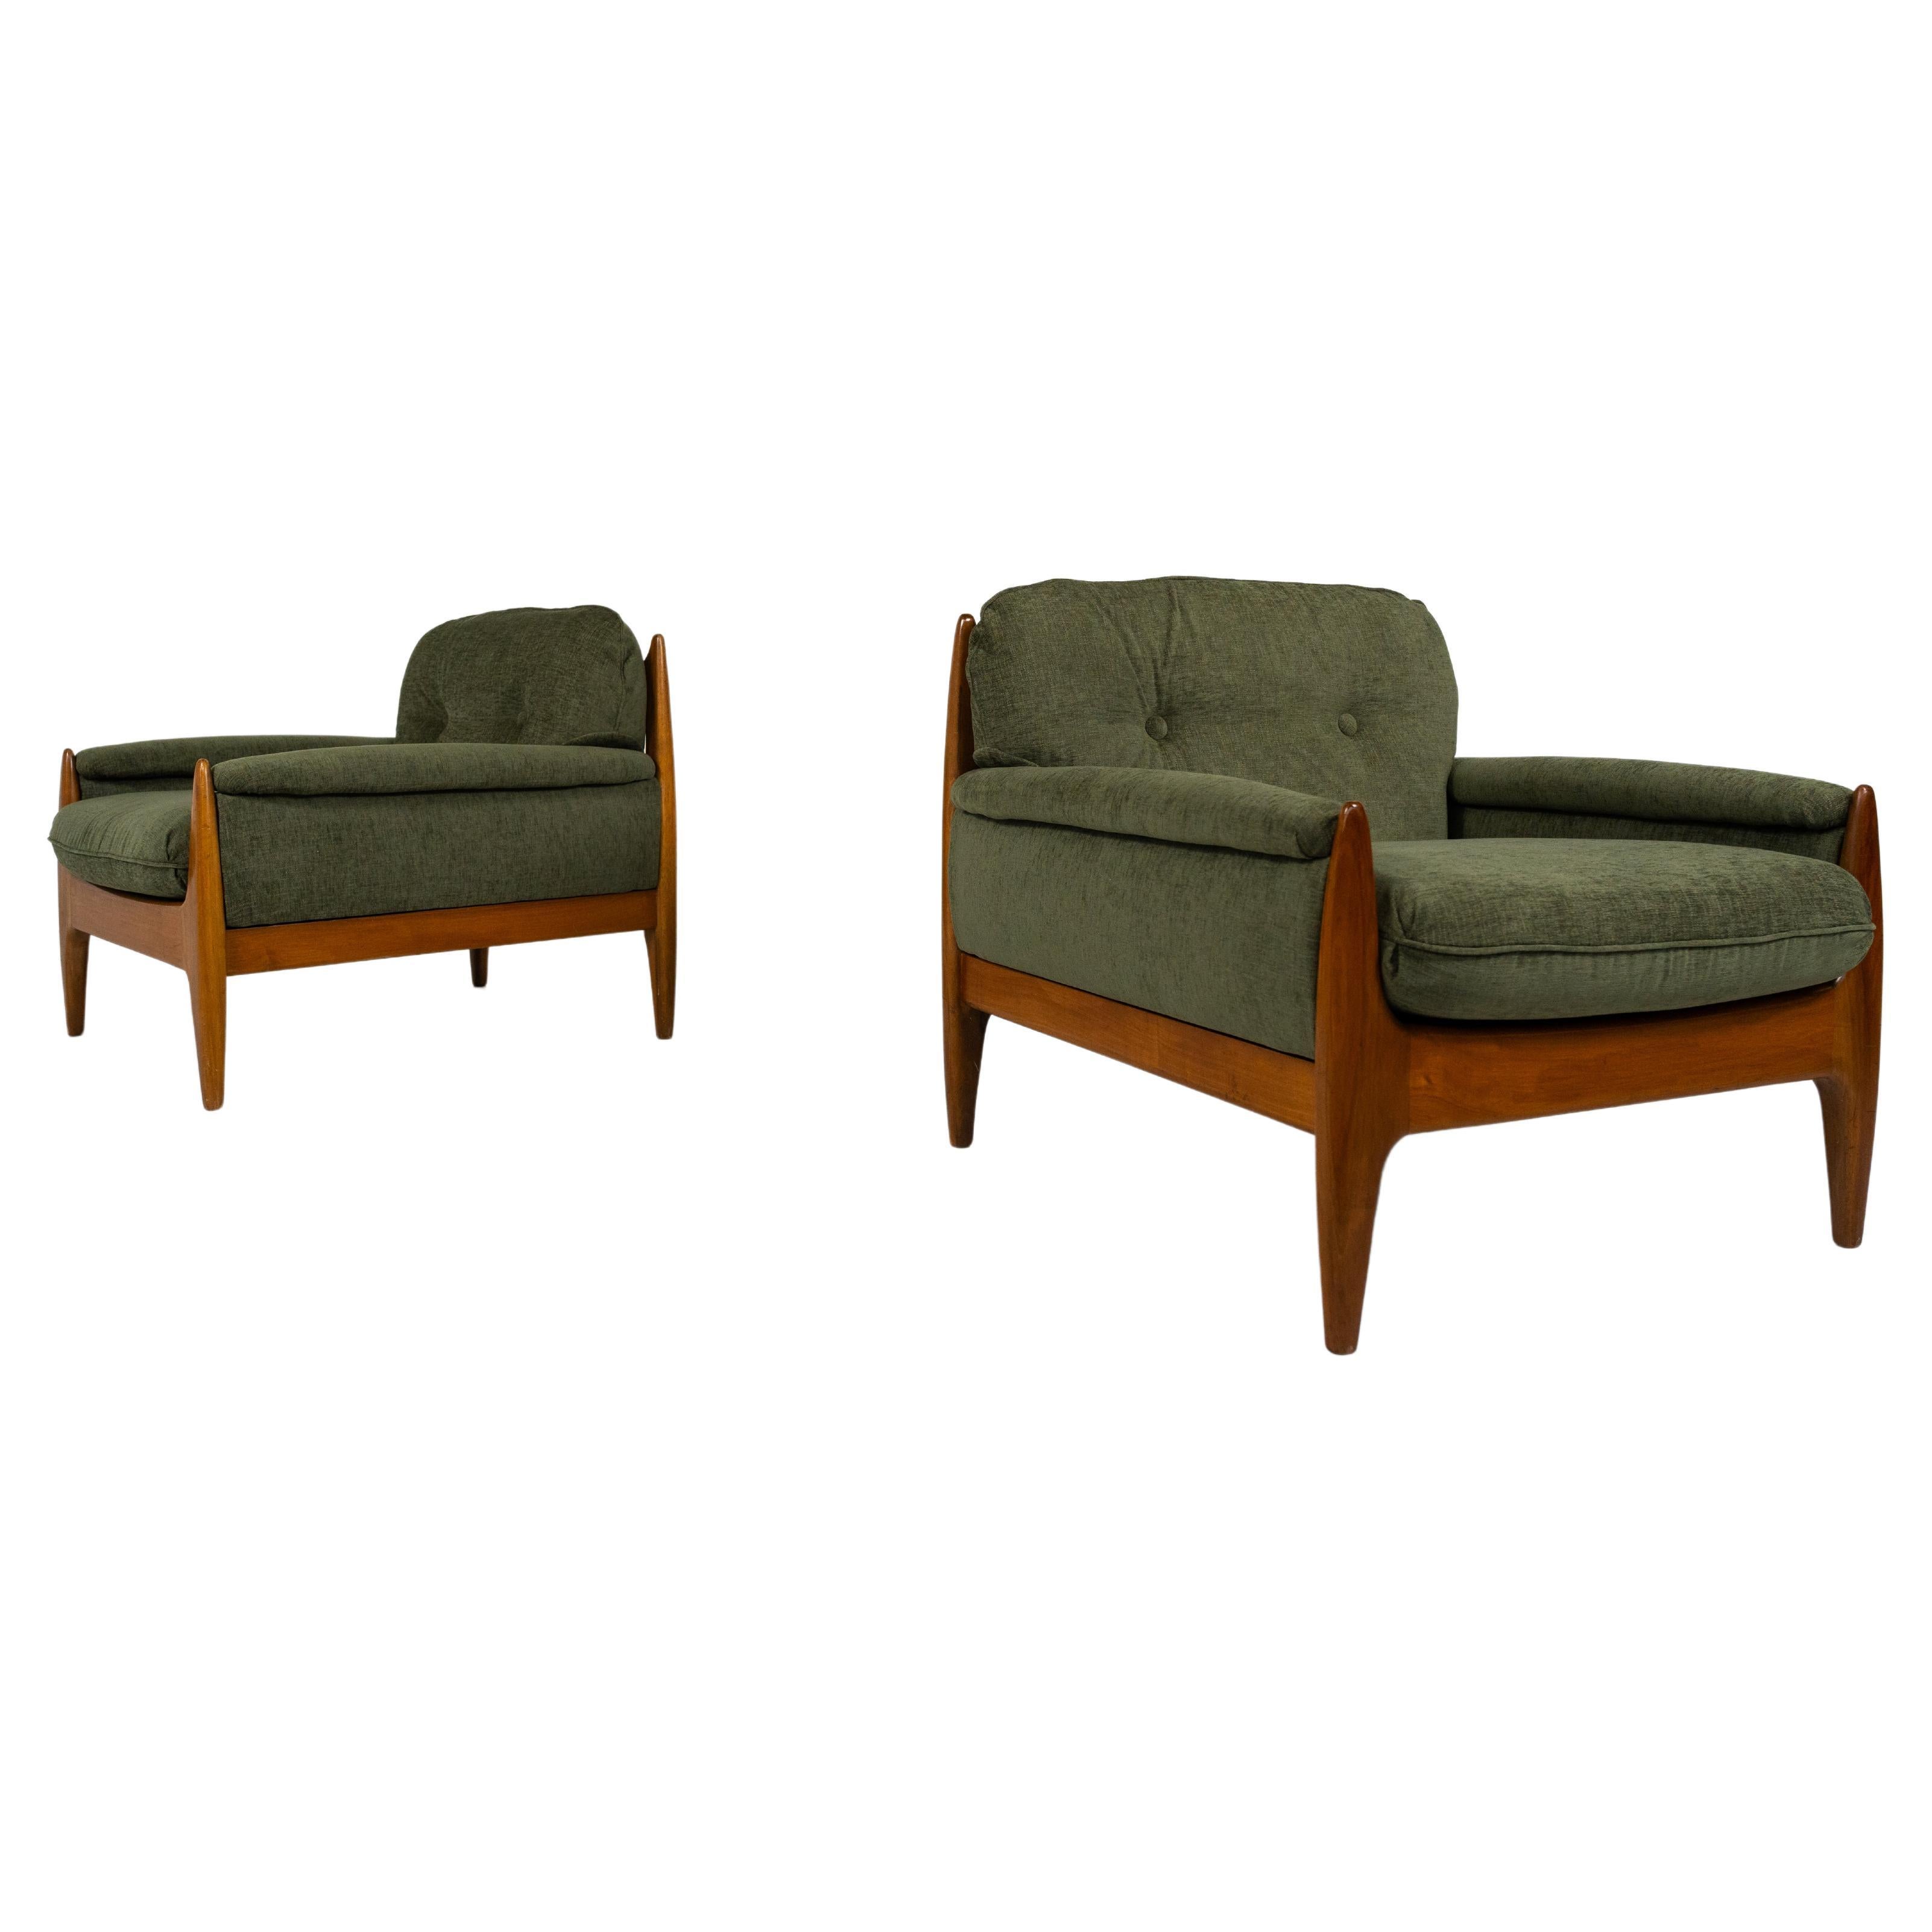 Mid-Century Modern Pair of Scandinavian Armchairs, 1960s - New Upholstery For Sale